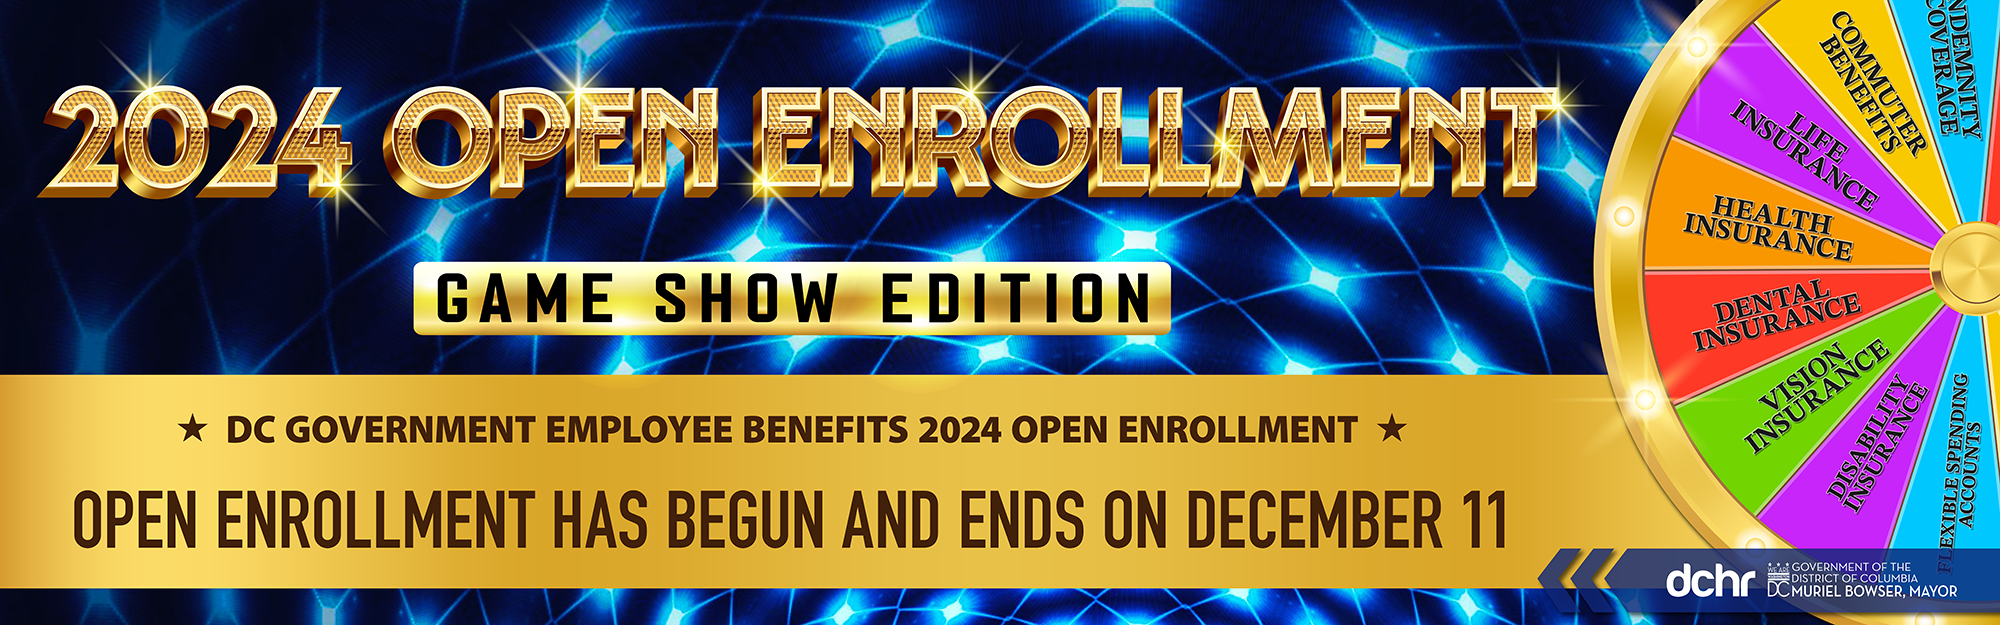 Open Enrollment for 2024 DC Government Employee Benefits